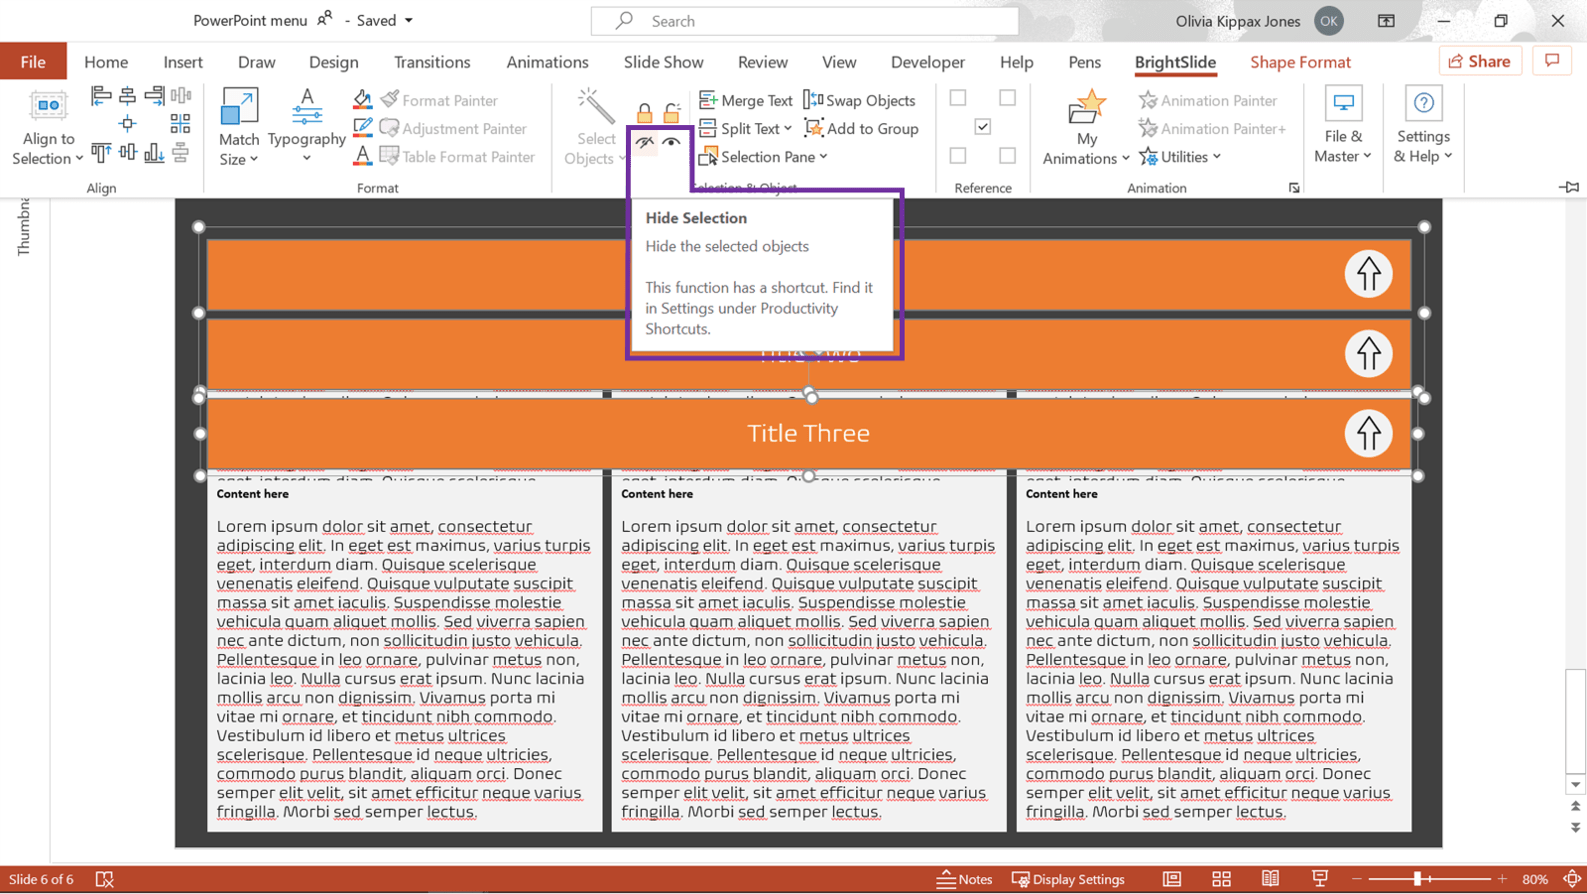 Screenshot of PowerPoint showing the BrightSlide tab with the Hide/Show tool highlighted